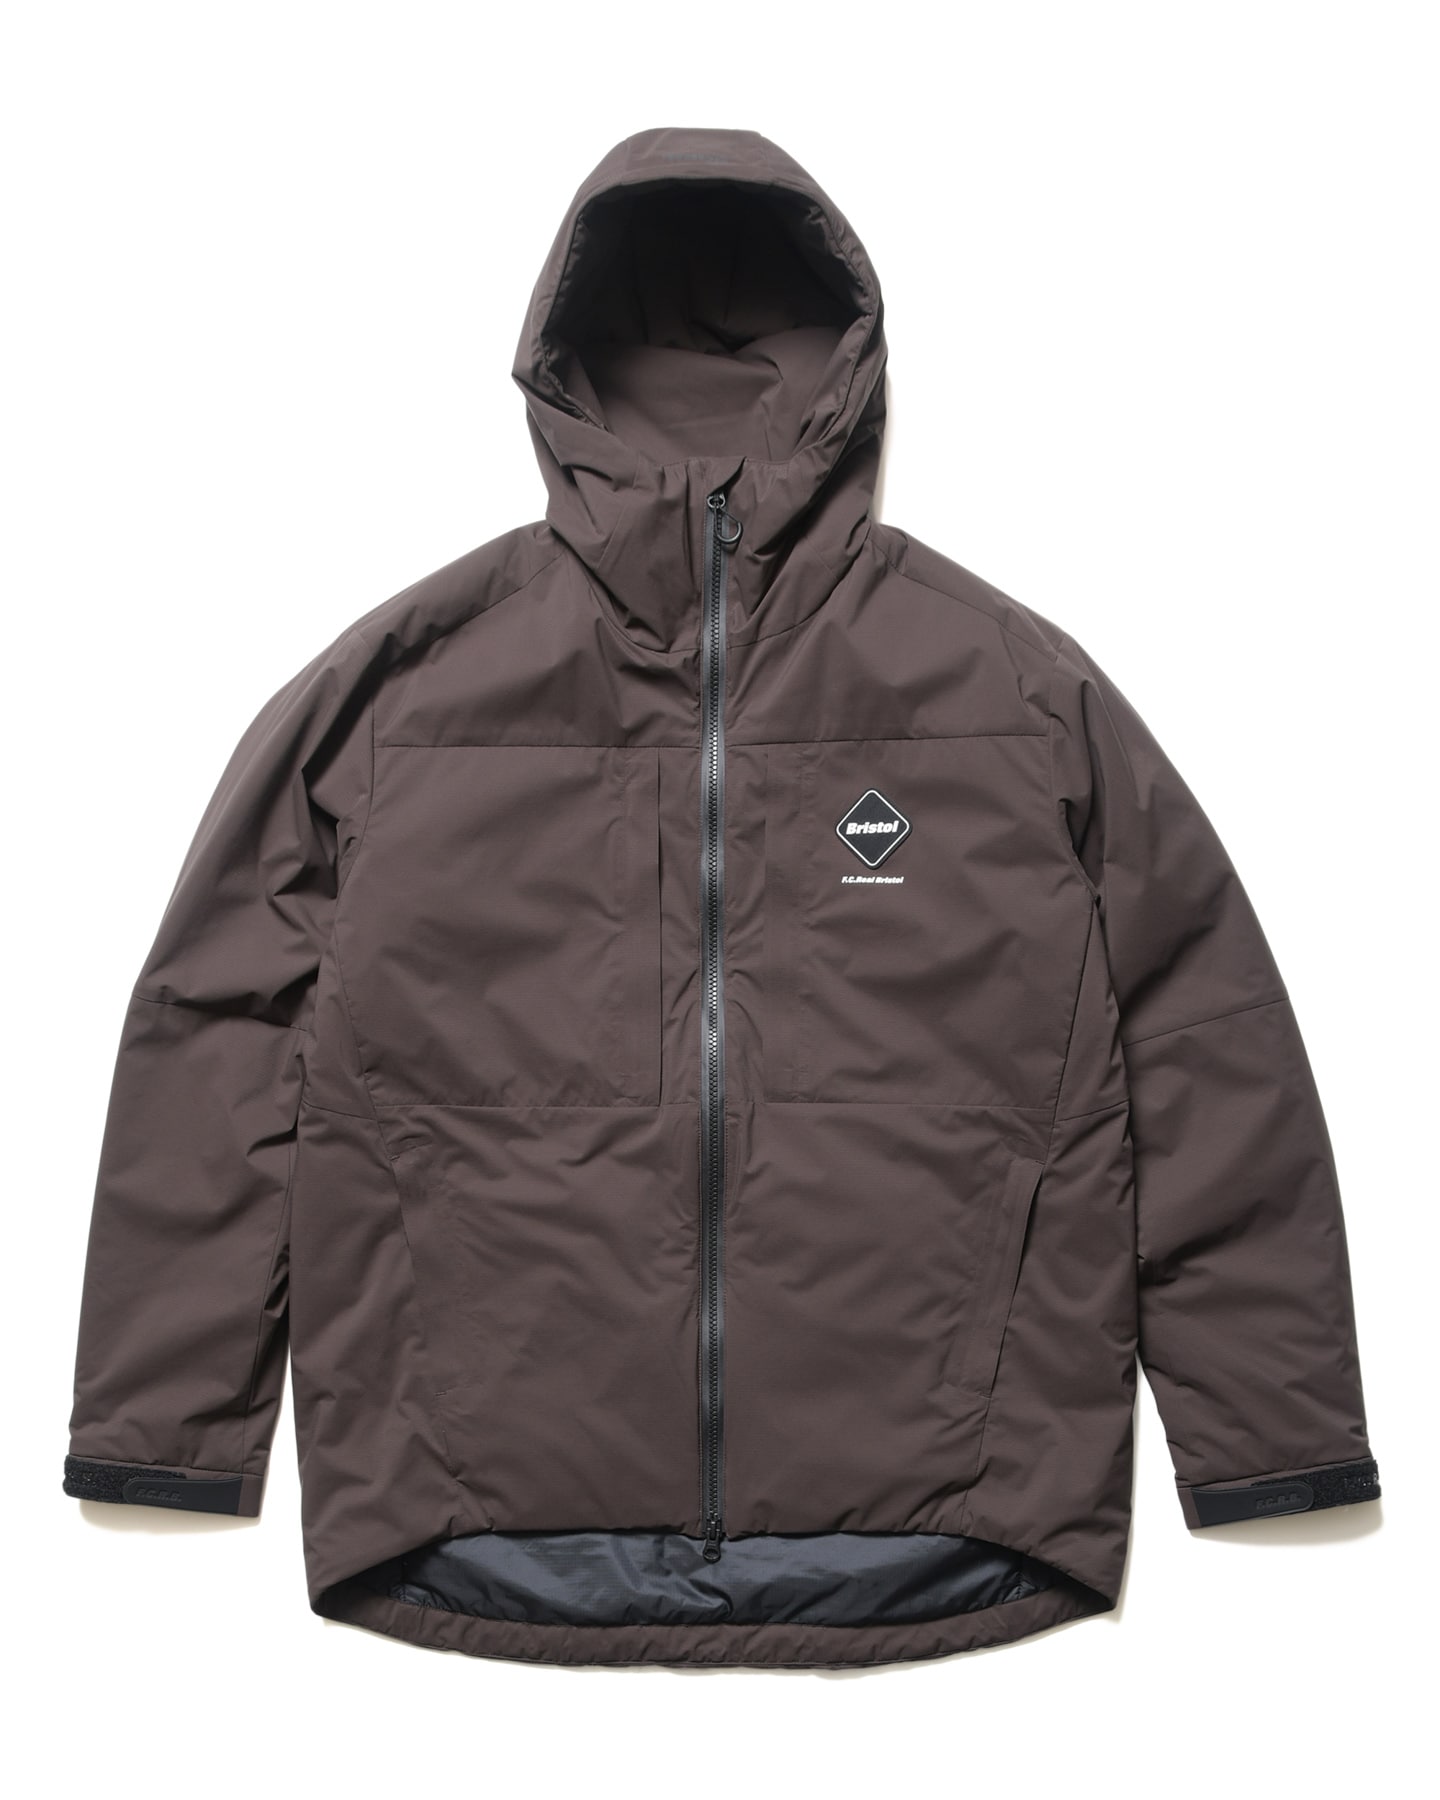 fcrb INSULATION PADDED HOODED JACKET L 茶素材ナイロン